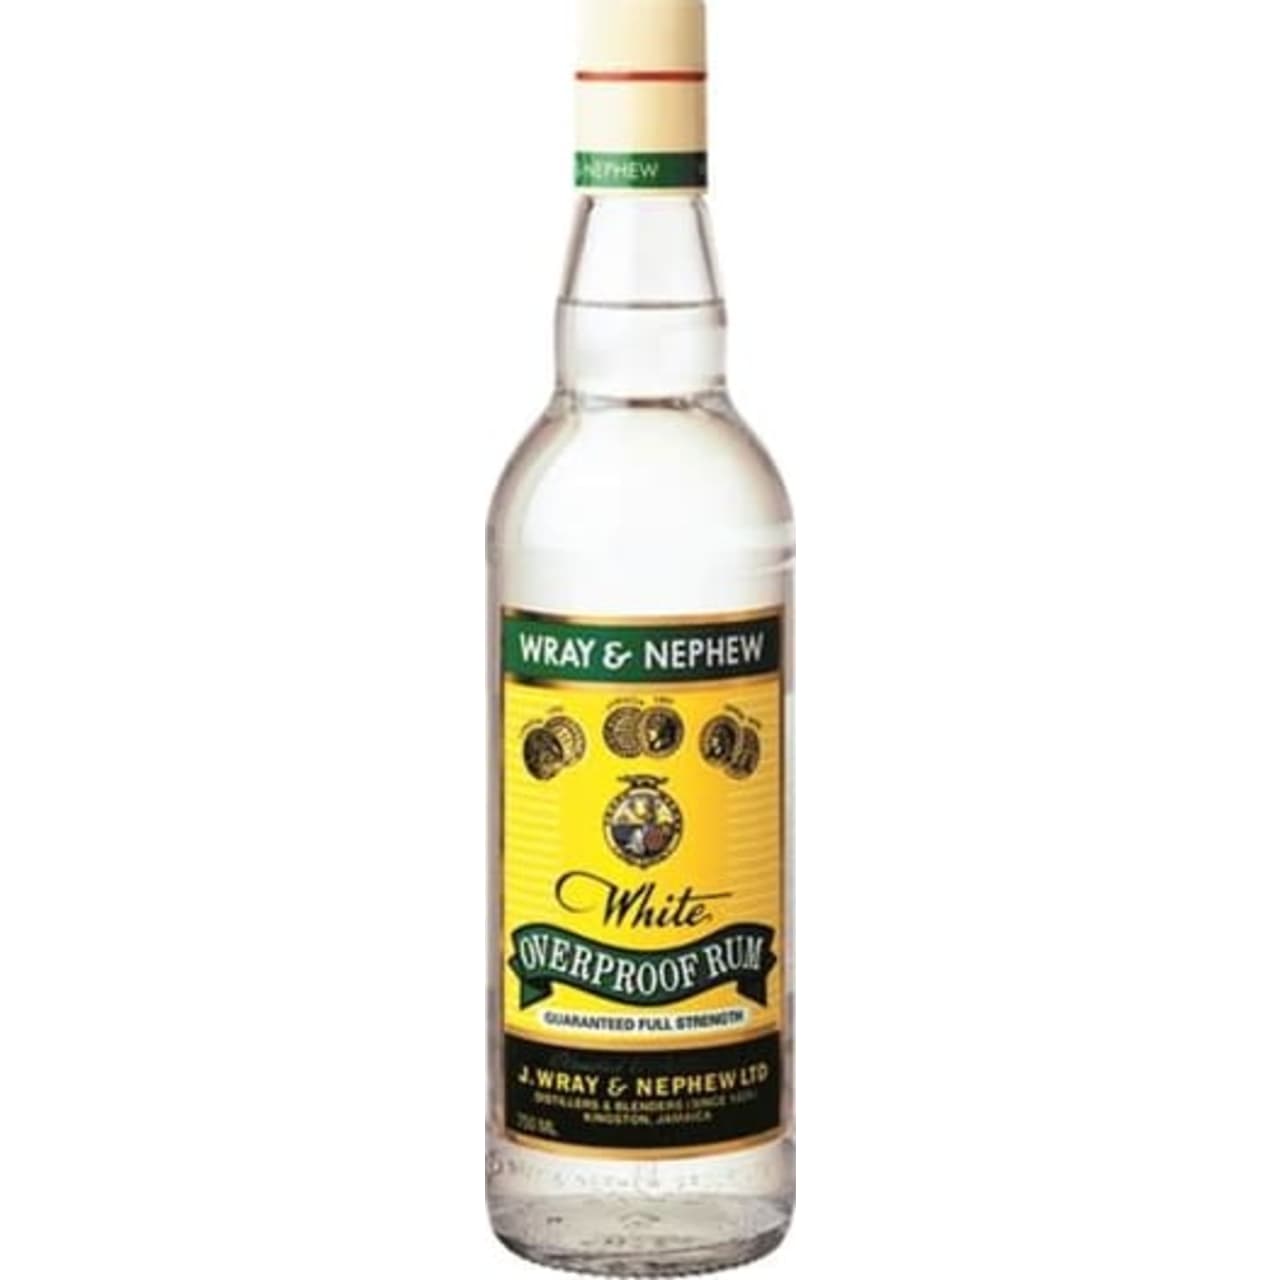 This is the original Jamaican rum of the Jamaican people. Notes of banana and Demerara as well as spice and a little oak. Palate is fruity and a little spirity with long and spiced finish.